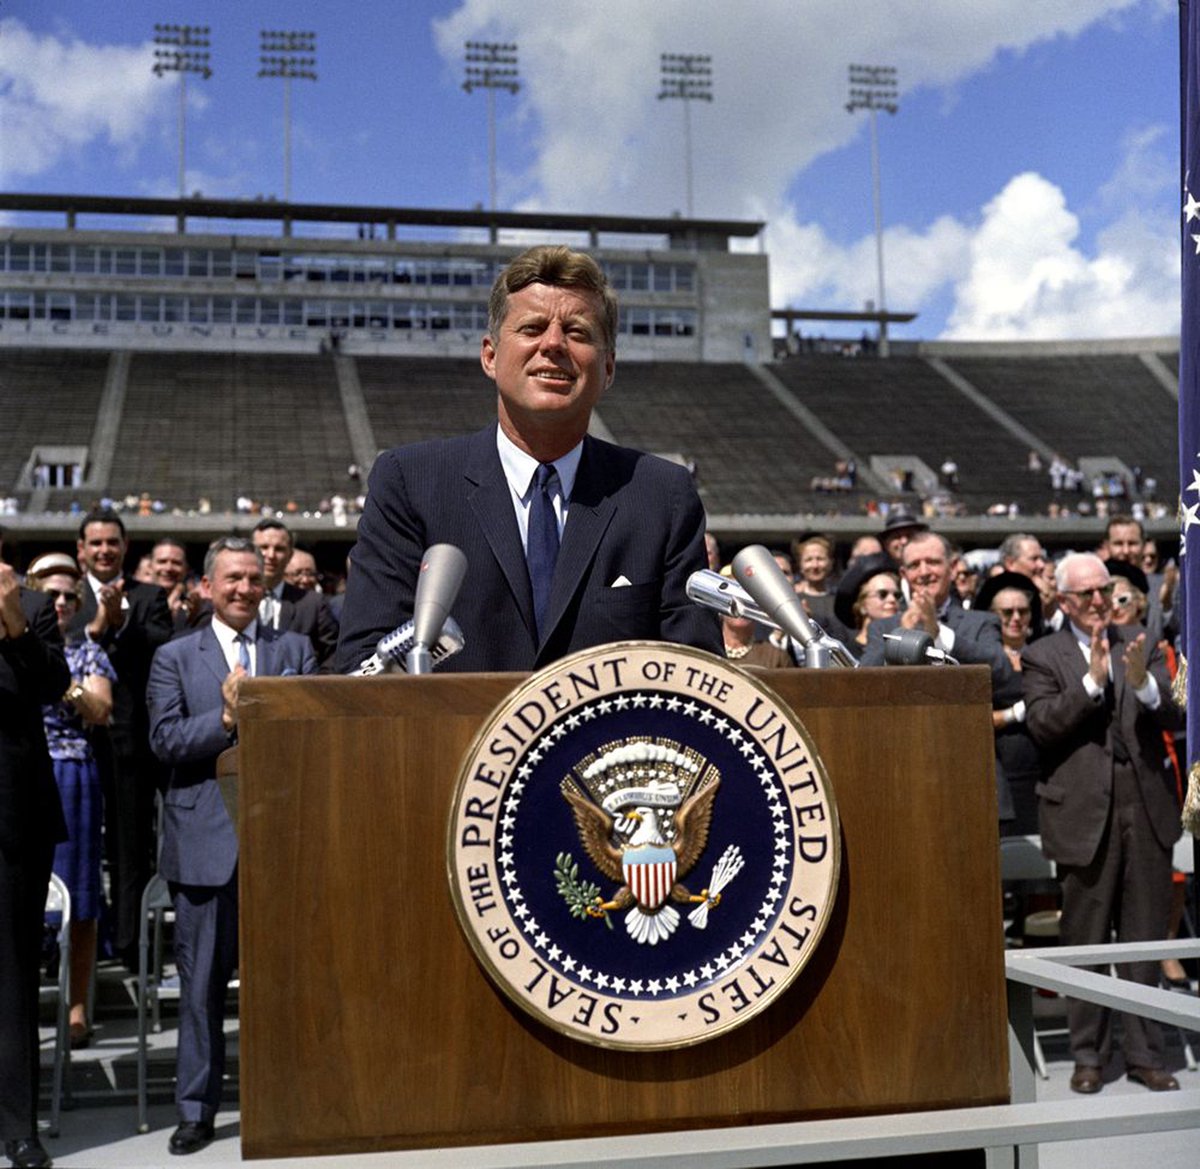 Today in 1962, JFK pledges the U.S. to go to the moon by decade’s end in speech at @RiceUniversity.  “We choose to go to the moon and do the other things, not because they are easy, but because they are hard.” @NASAhistory @NASA_Johnson